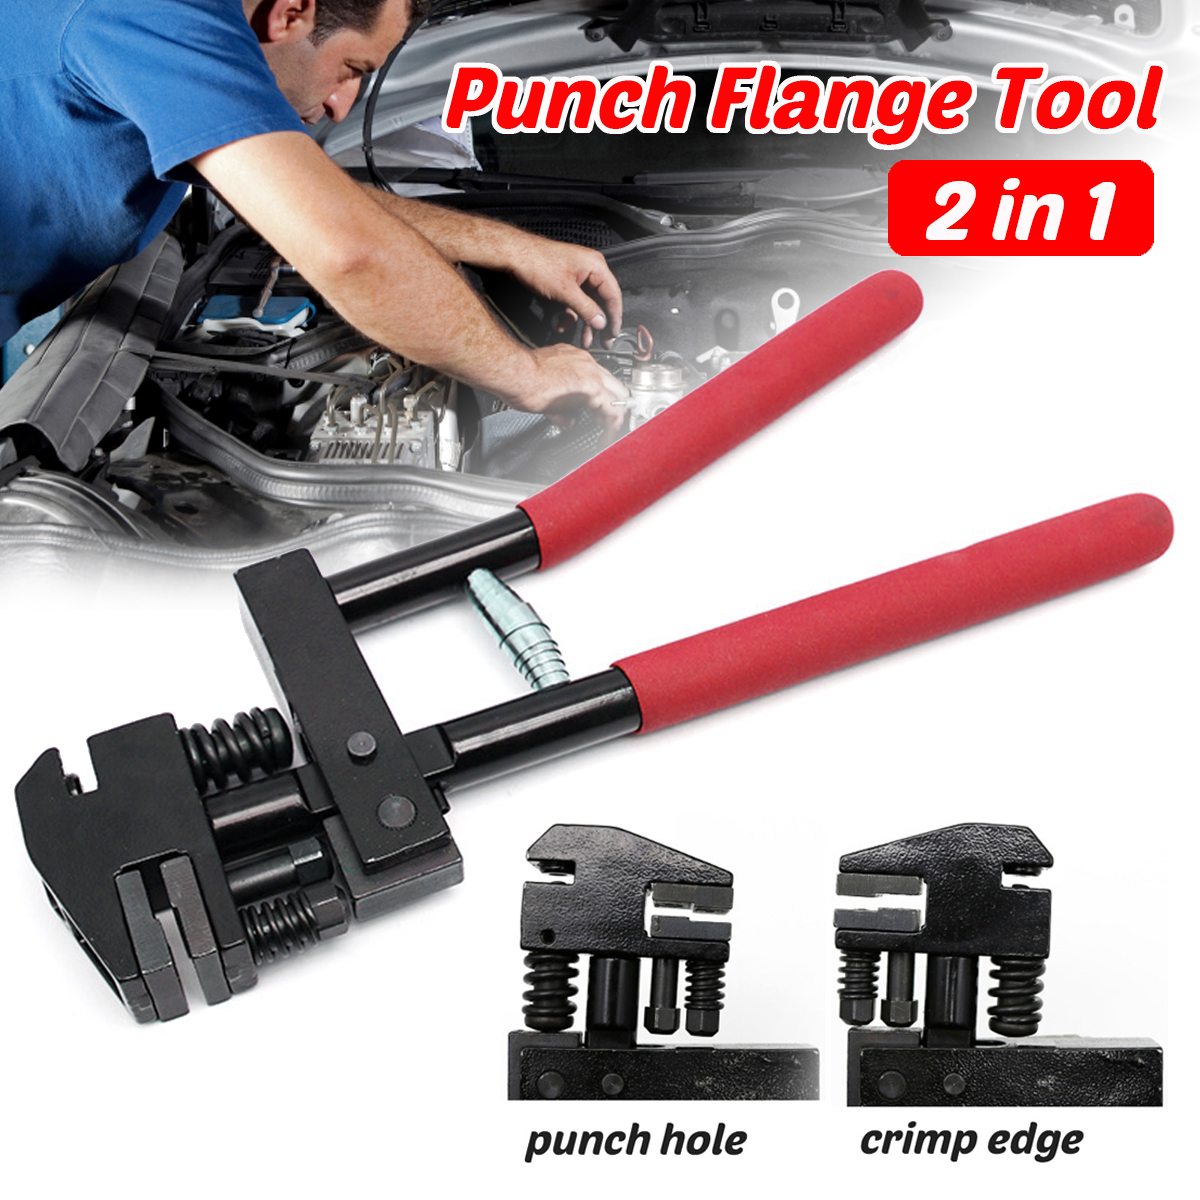 2-in-1-Panel-Flanging-Plier-Crimp-Tool-5mm-Hole-Punch-Tool-For-Sheet-Metal-Tool-1718609-1